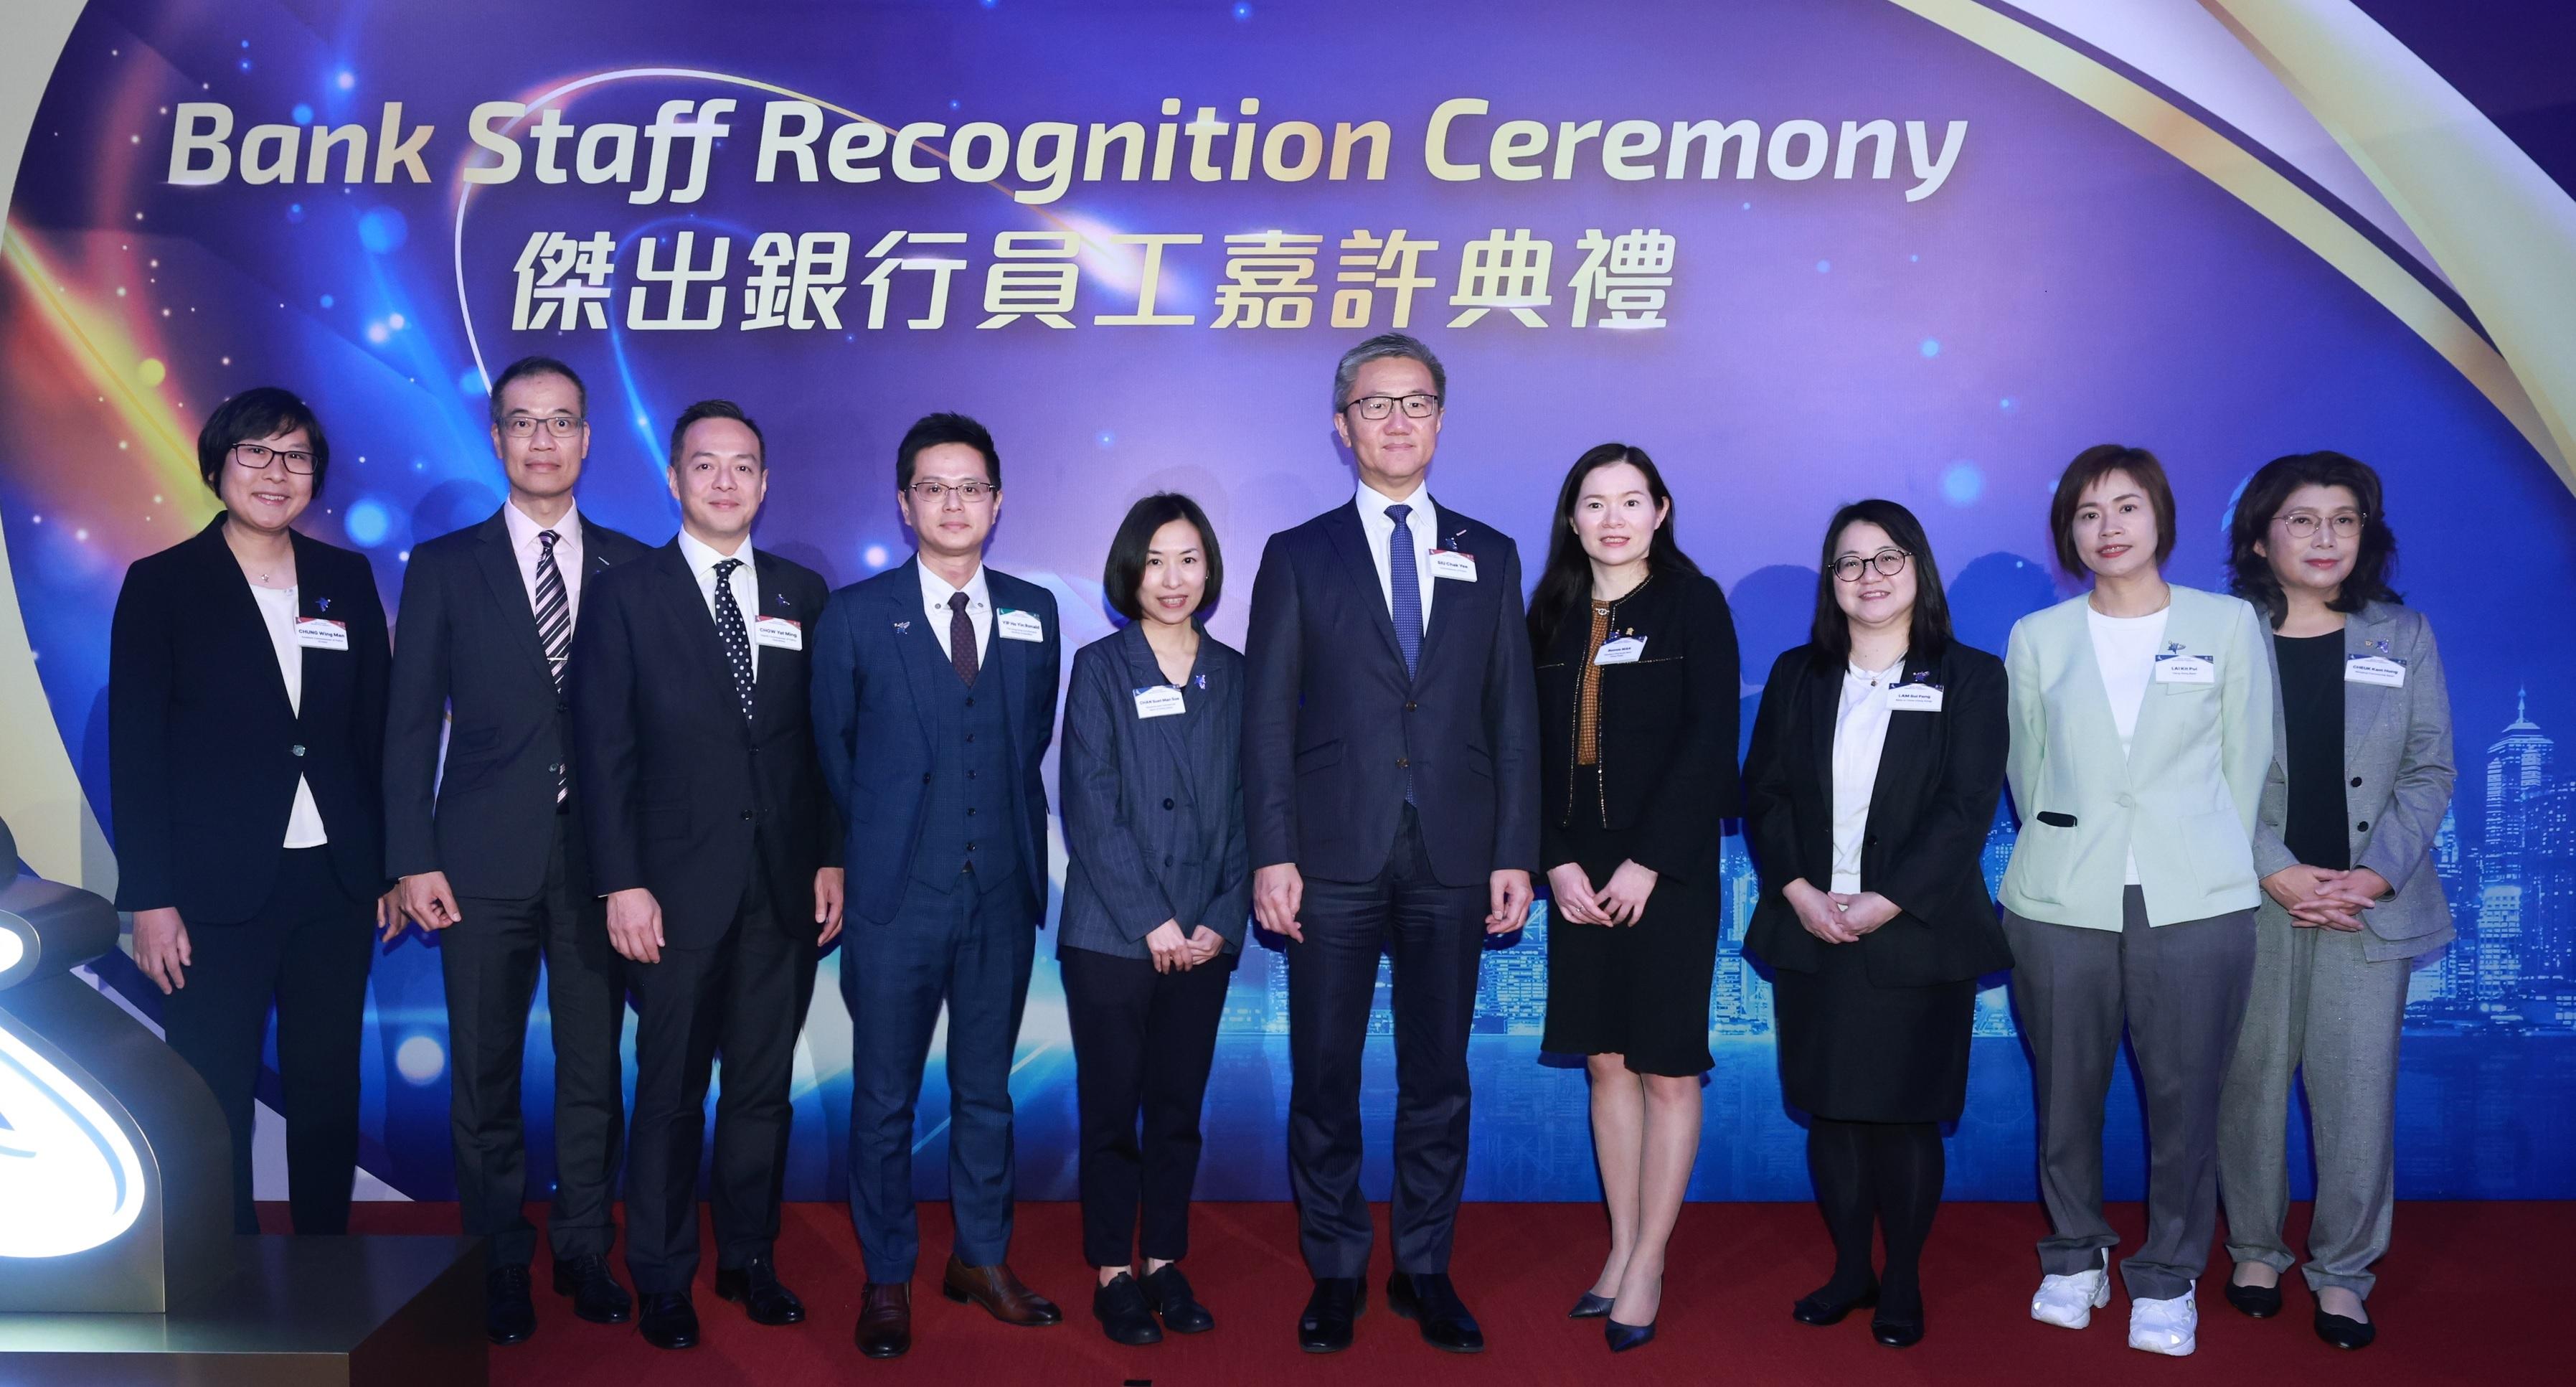 The Bank Staff Recognition Ceremony organised by the Hong Kong Police Force was held today (March 22). Photo shows the Commissioner of Police, Mr Siu Chak-yee (fifth right) taking a group photo with awardees of the Spotlight Award and other guests.